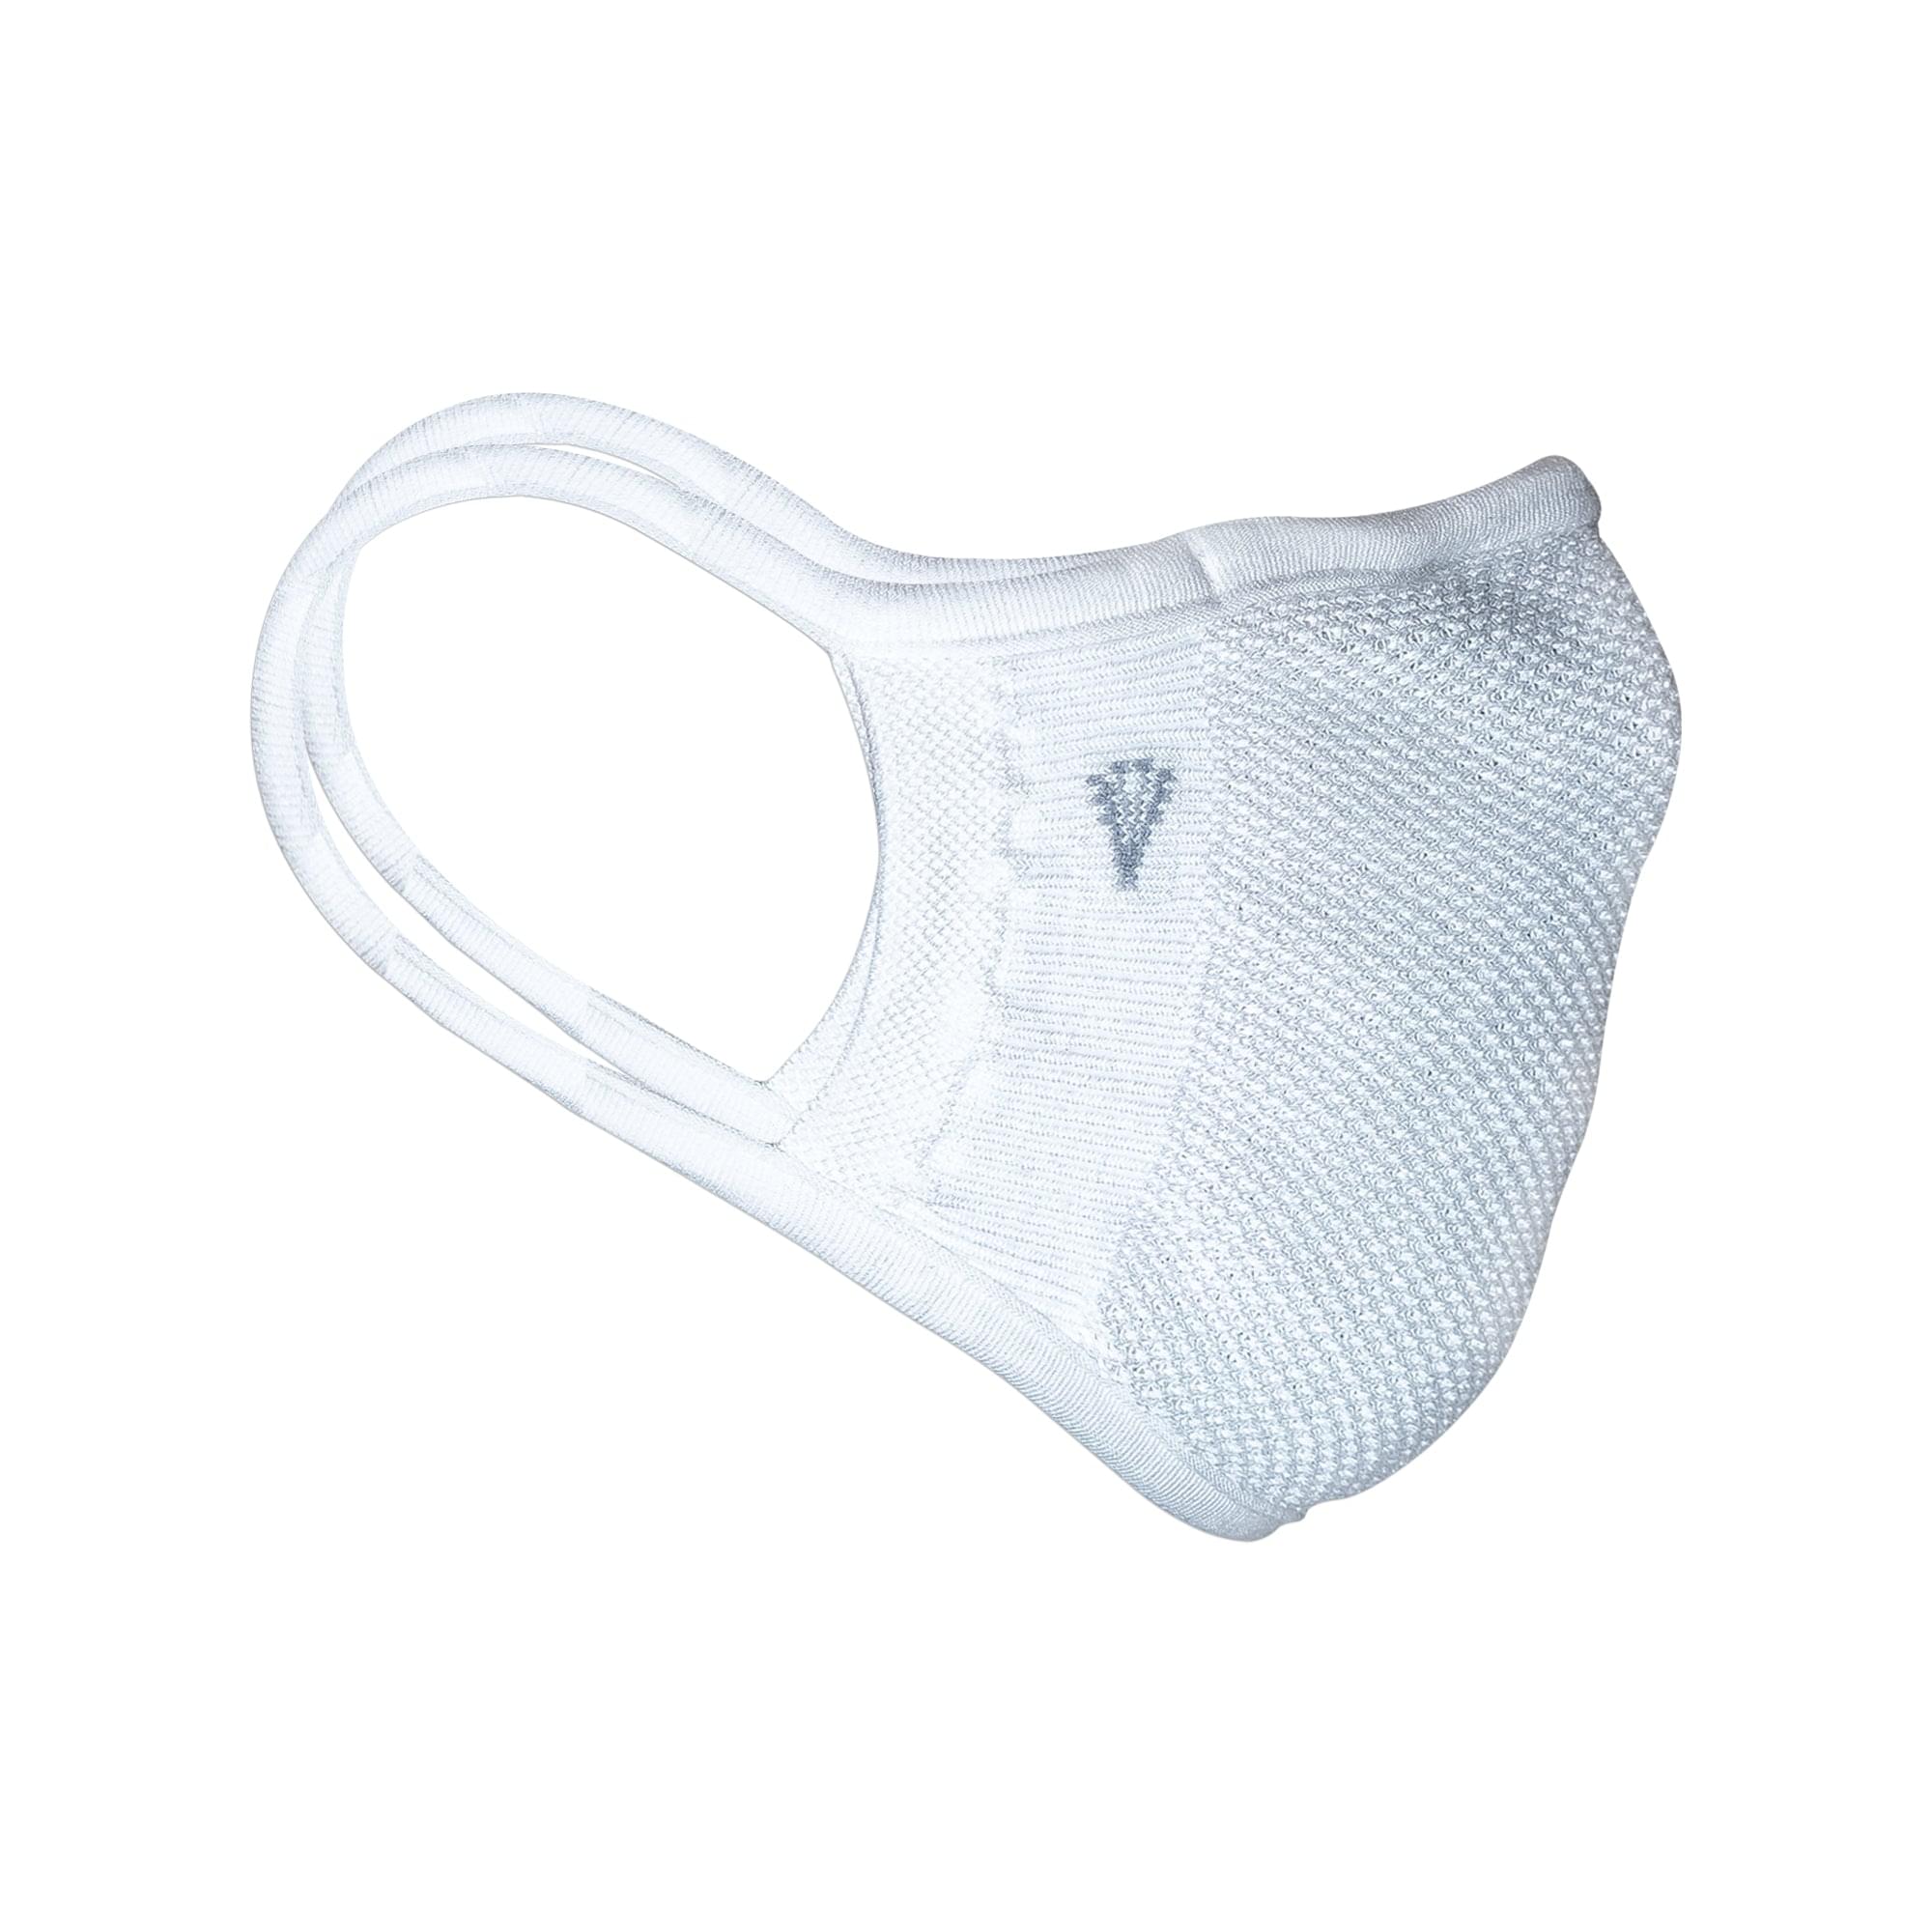 4-Layer Anti-Bacterial Protection Mask for Adults (Unisex) - Pack of 1